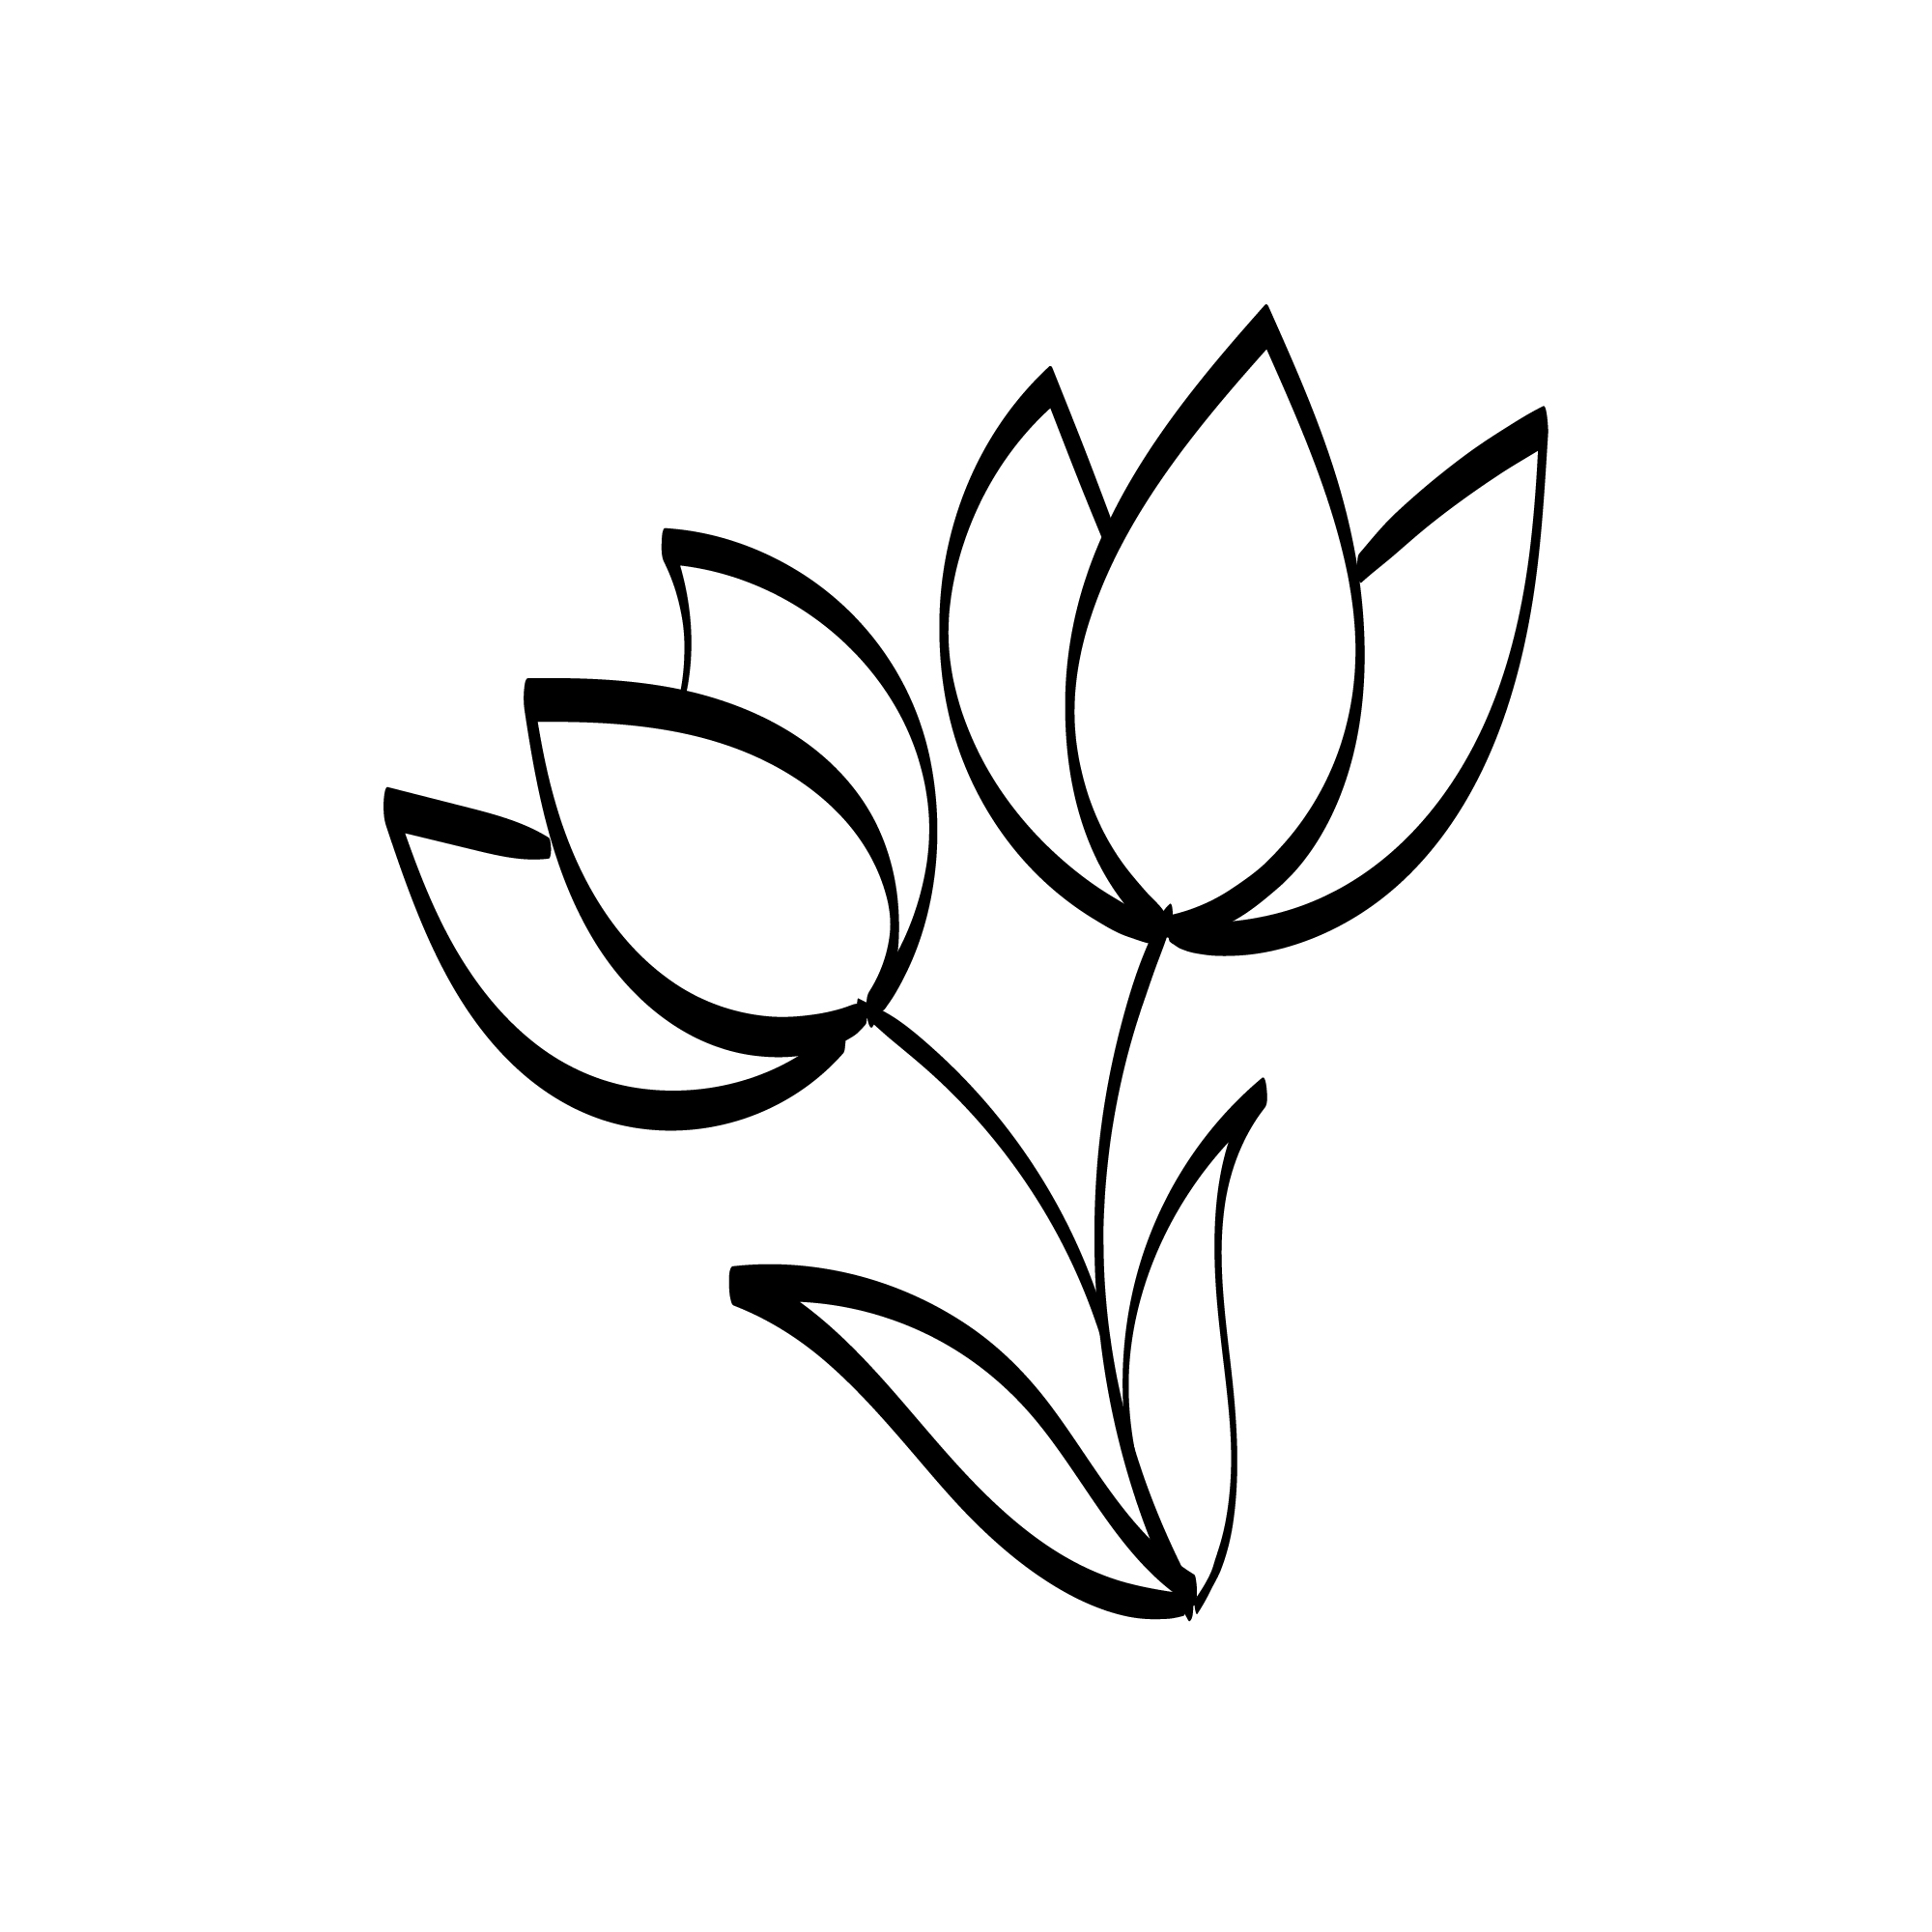 Flower Drawing Vectors | Free Illustrations, Drawings, PNG Clip Art, &  Backgrounds Images - rawpixel